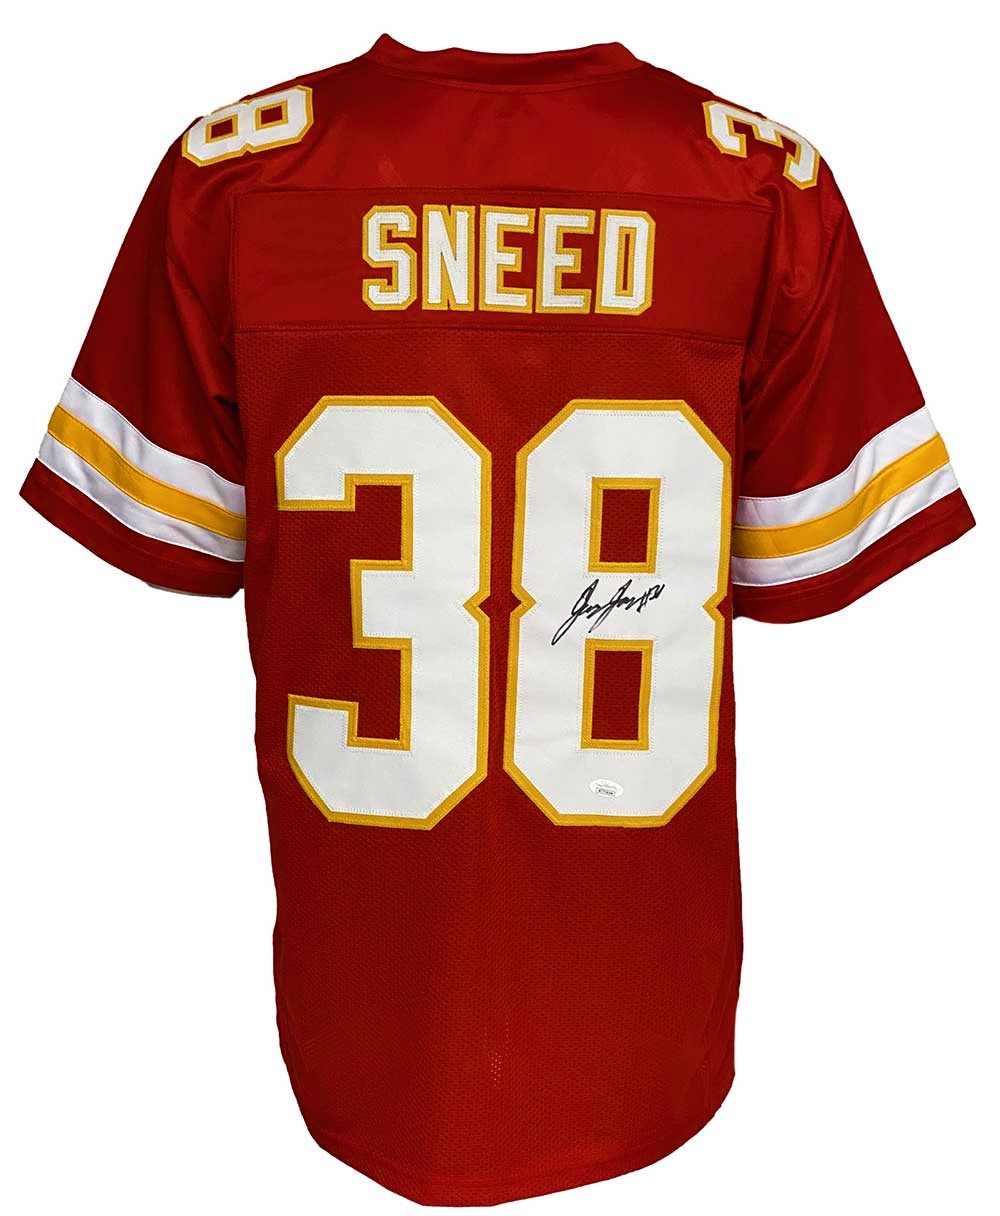 sneed chiefs jersey